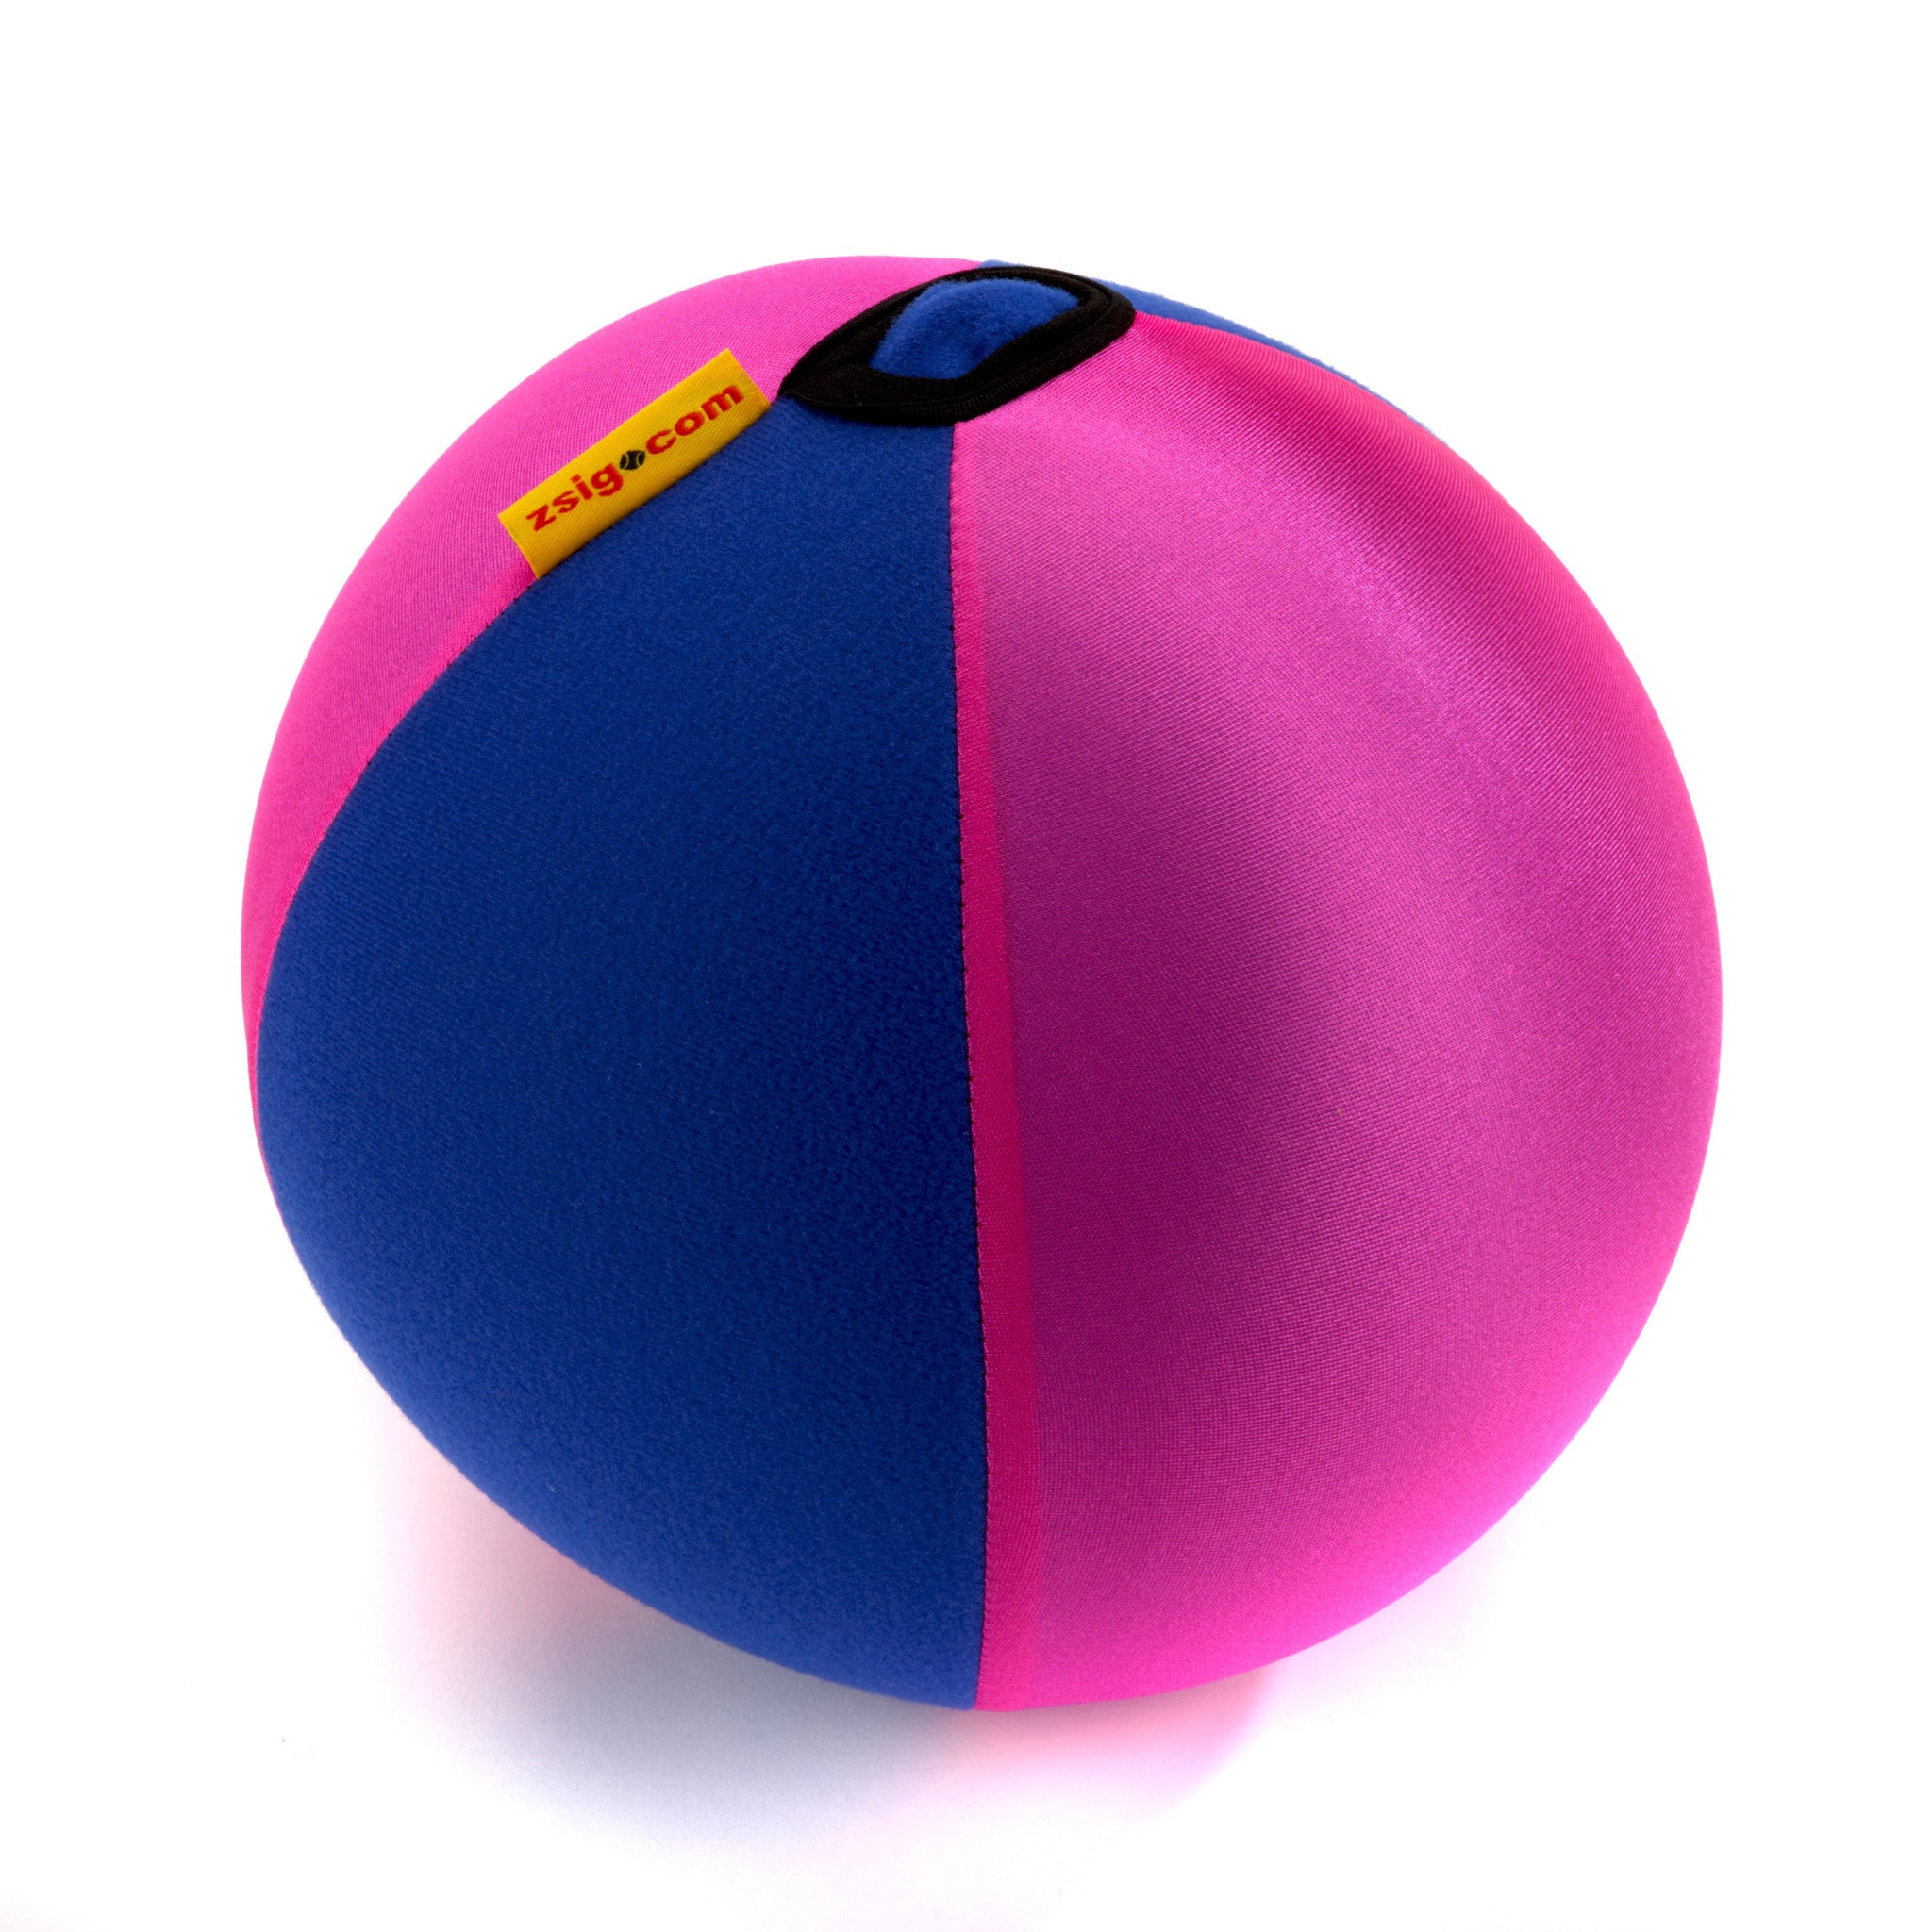 Balloon Ball. Superb coaching aid for young children. Stretchy washable cover turns ordinary balloons into a light, floaty ball - and no bursts.